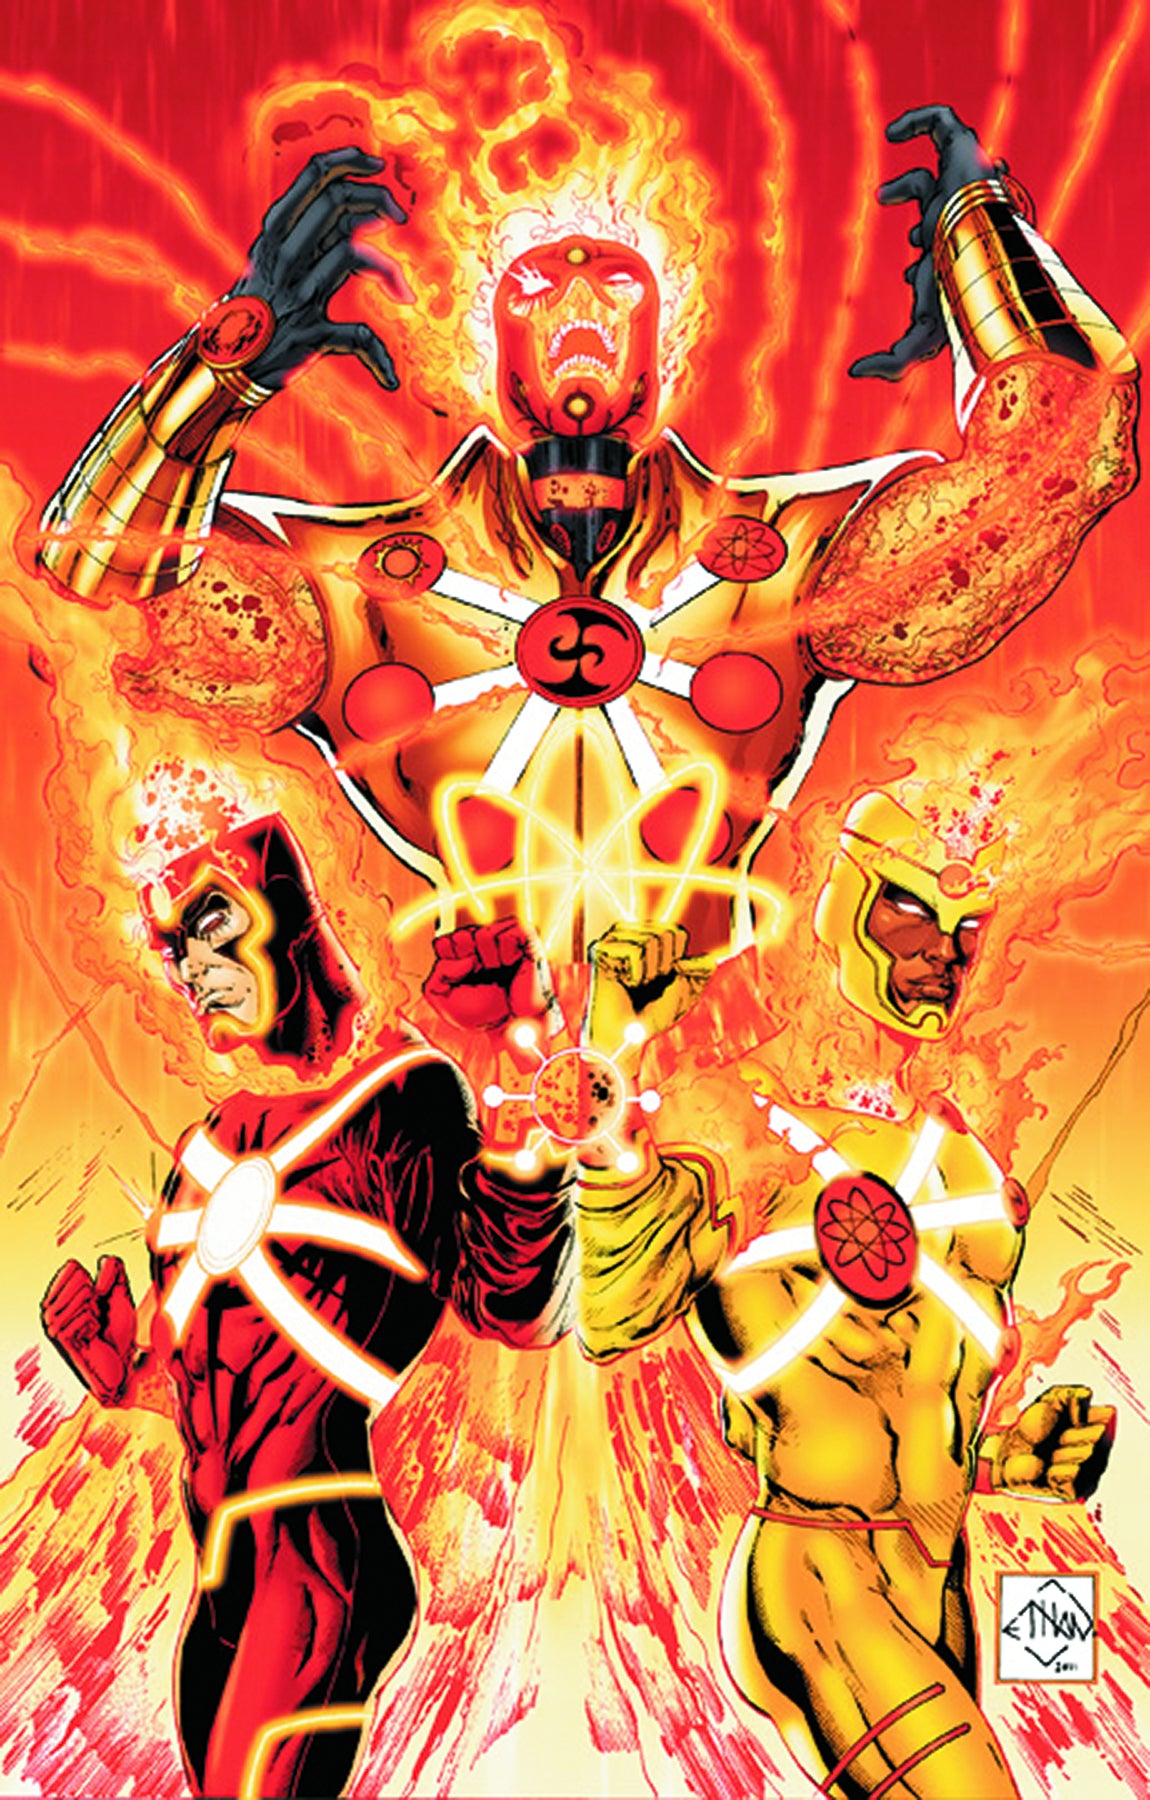 Photo of Fury of Firestorm the Nuclear Men Issue 1 comic sold by Stronghold Collectibles